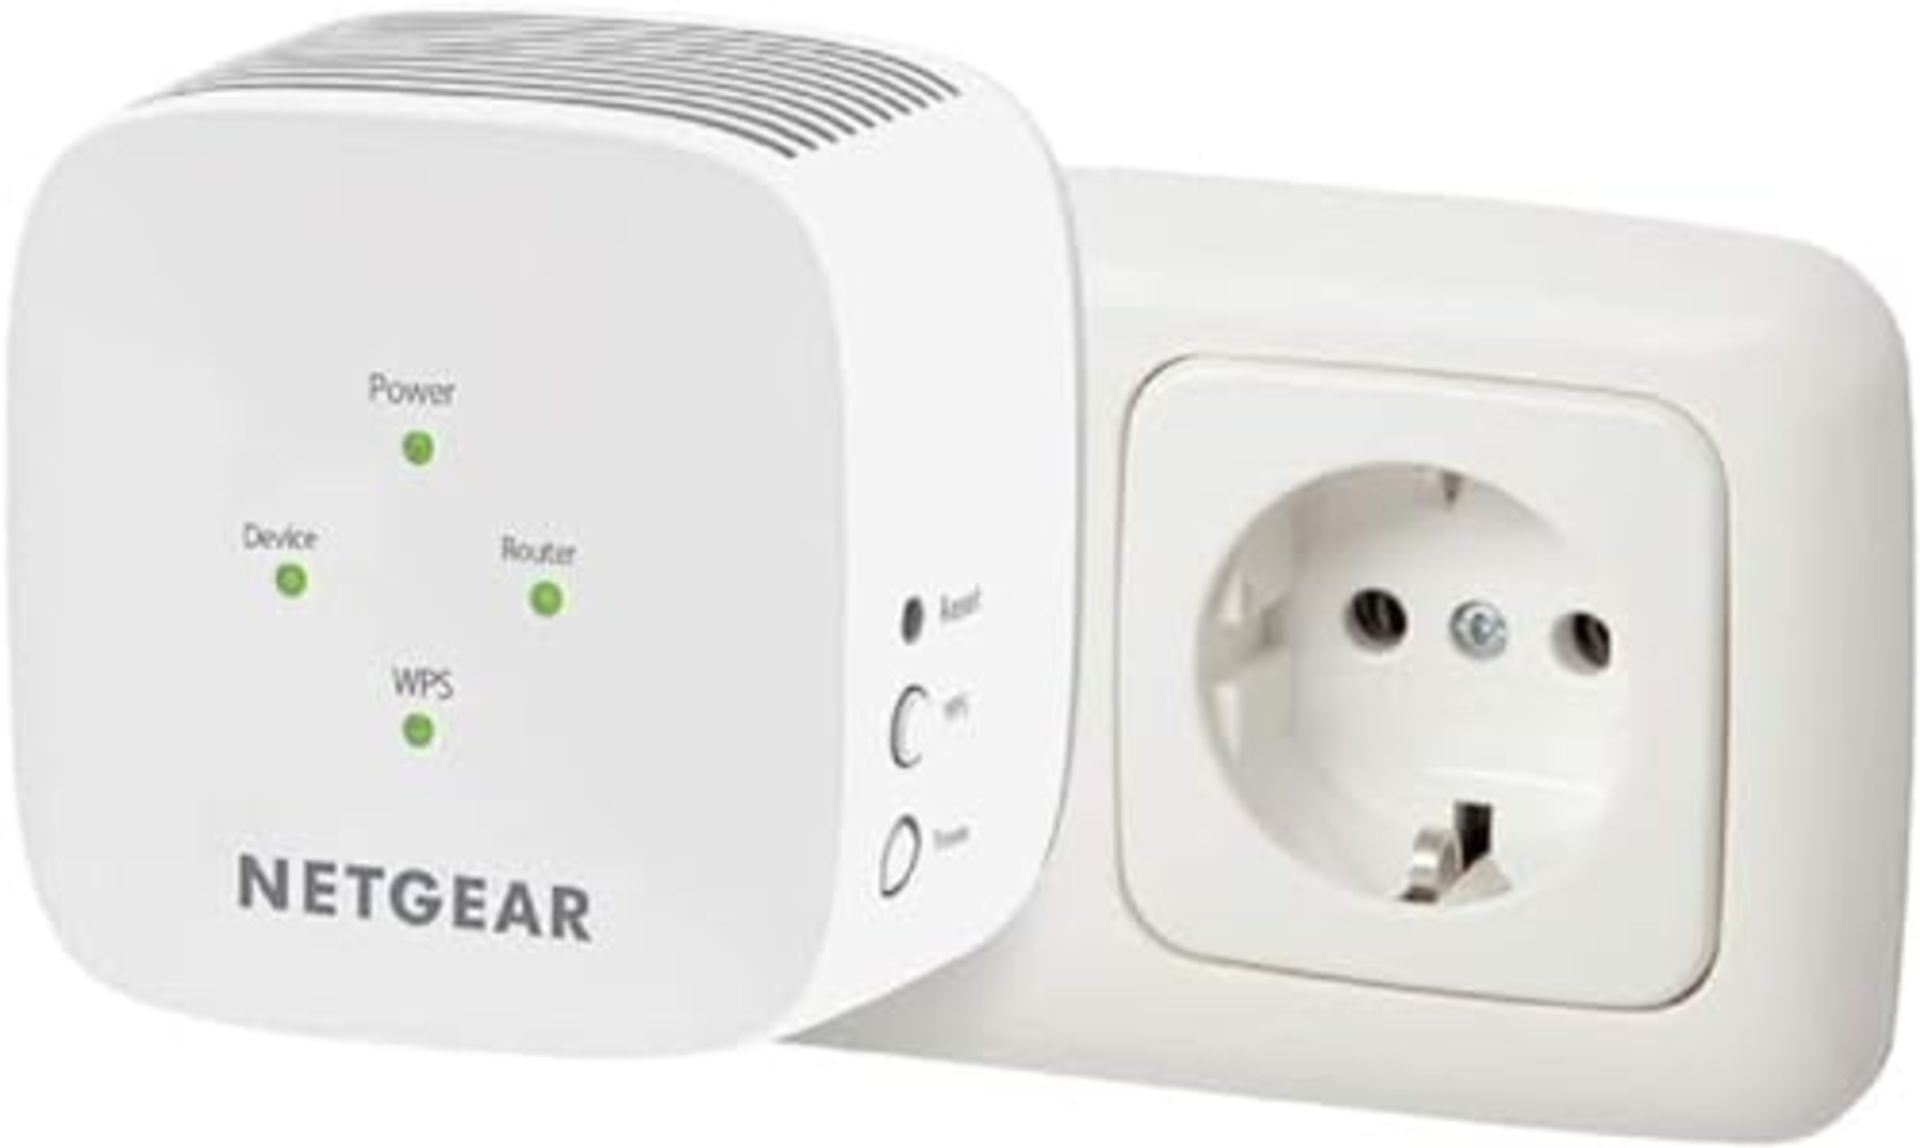 NETGEAR WLAN Repeater EX3110 WLAN amplifier AC750 (Dual-Band WiFi 2.4/5 GHz, coverage - Image 4 of 6